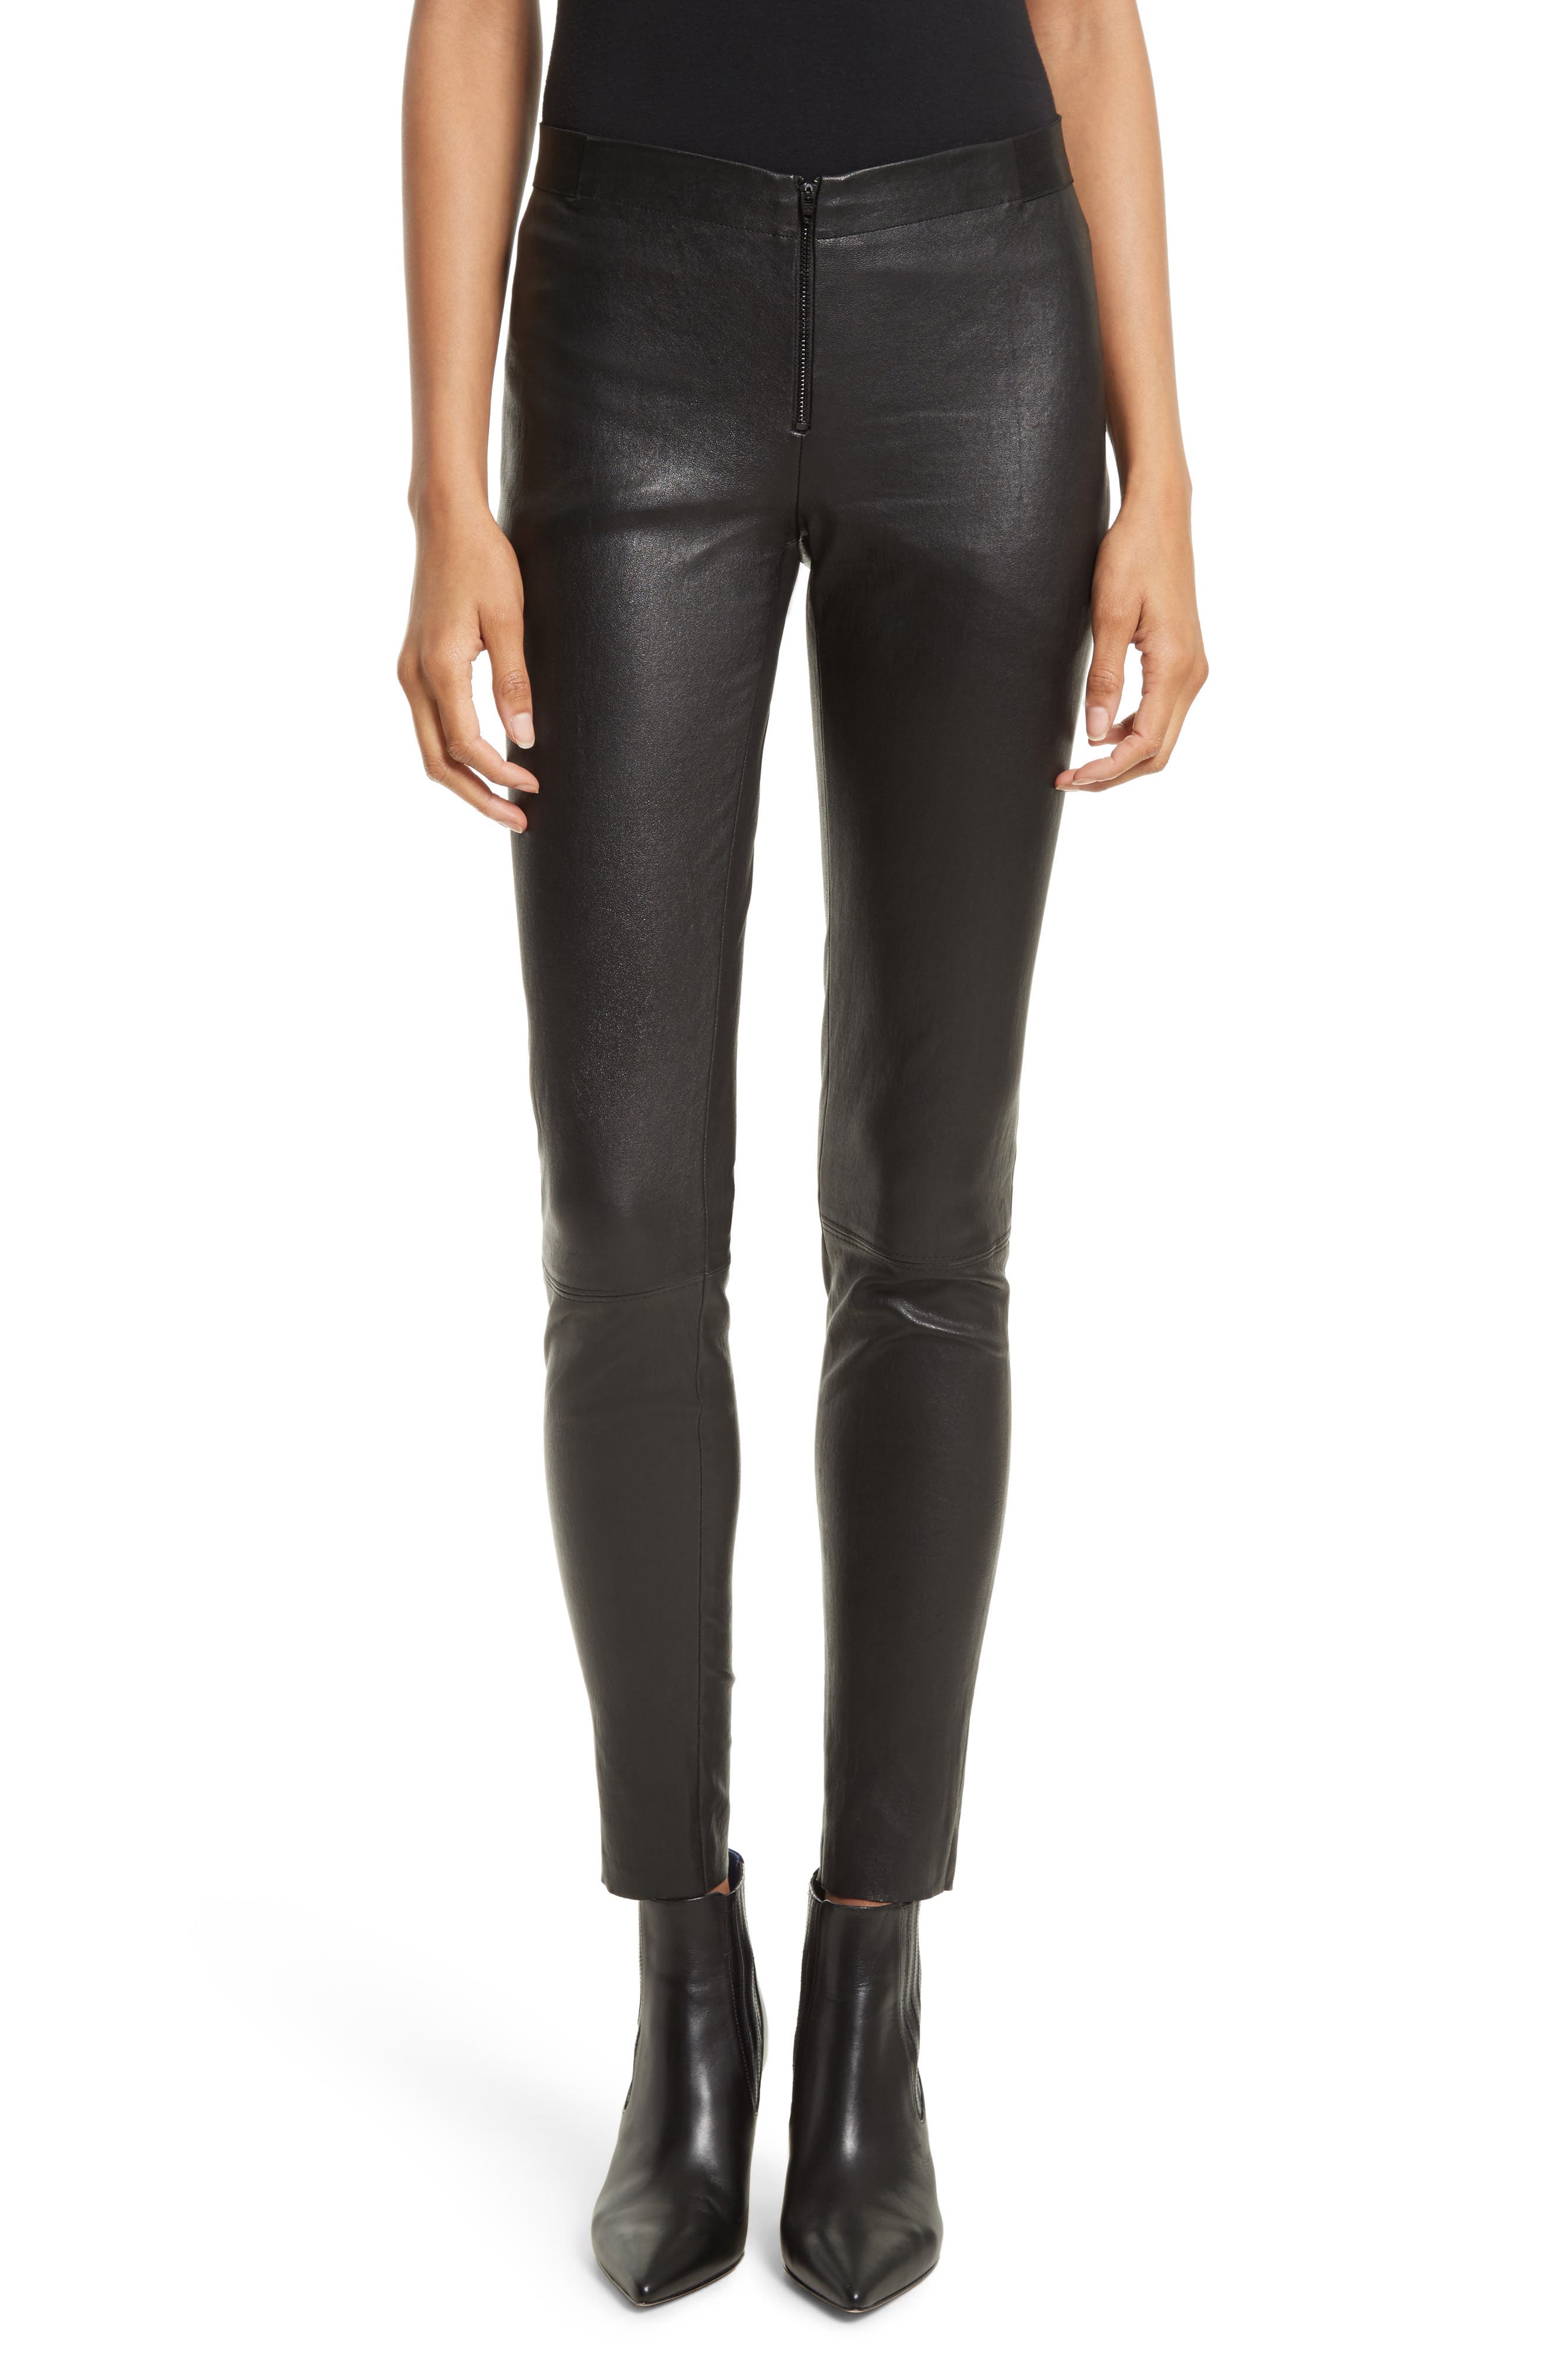 real leather pants for women